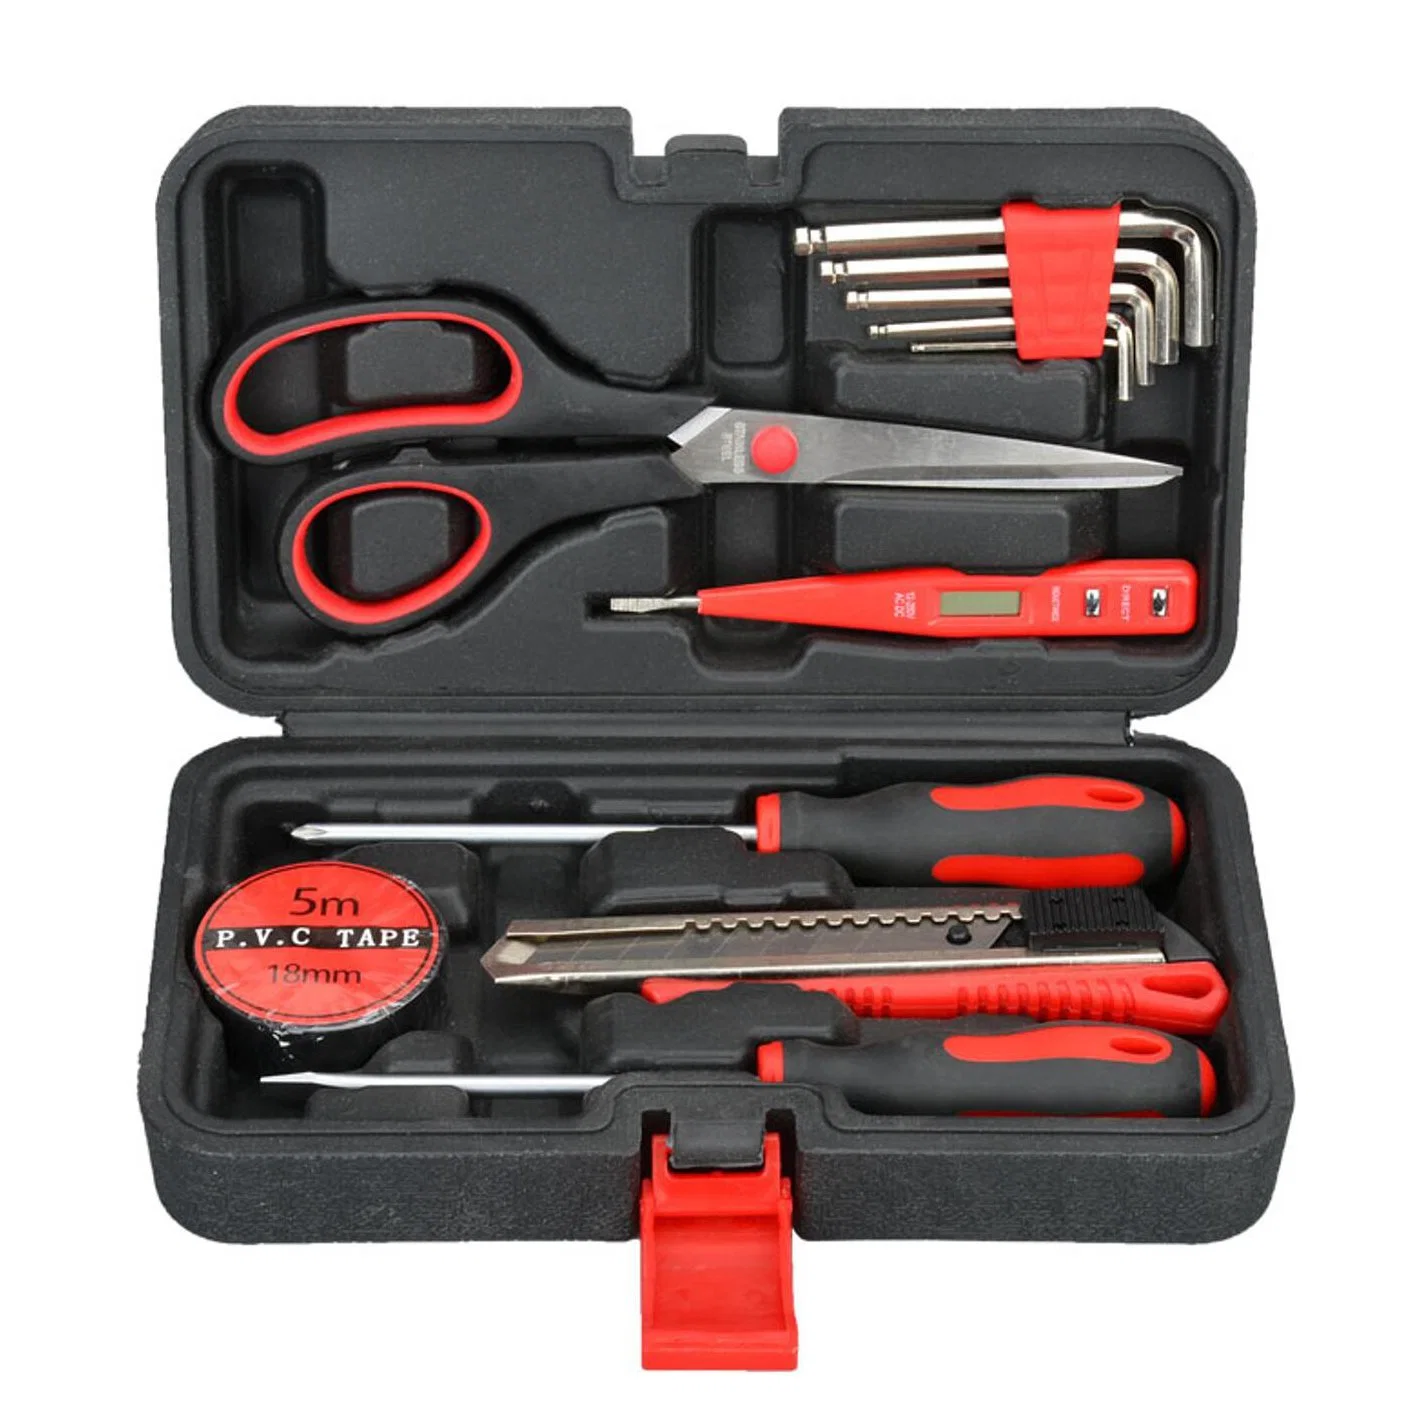 Ydp012 Household Daily Use Kit Auto Bicycle Repair Tool Set Professional 12PCS Hand Tool Set